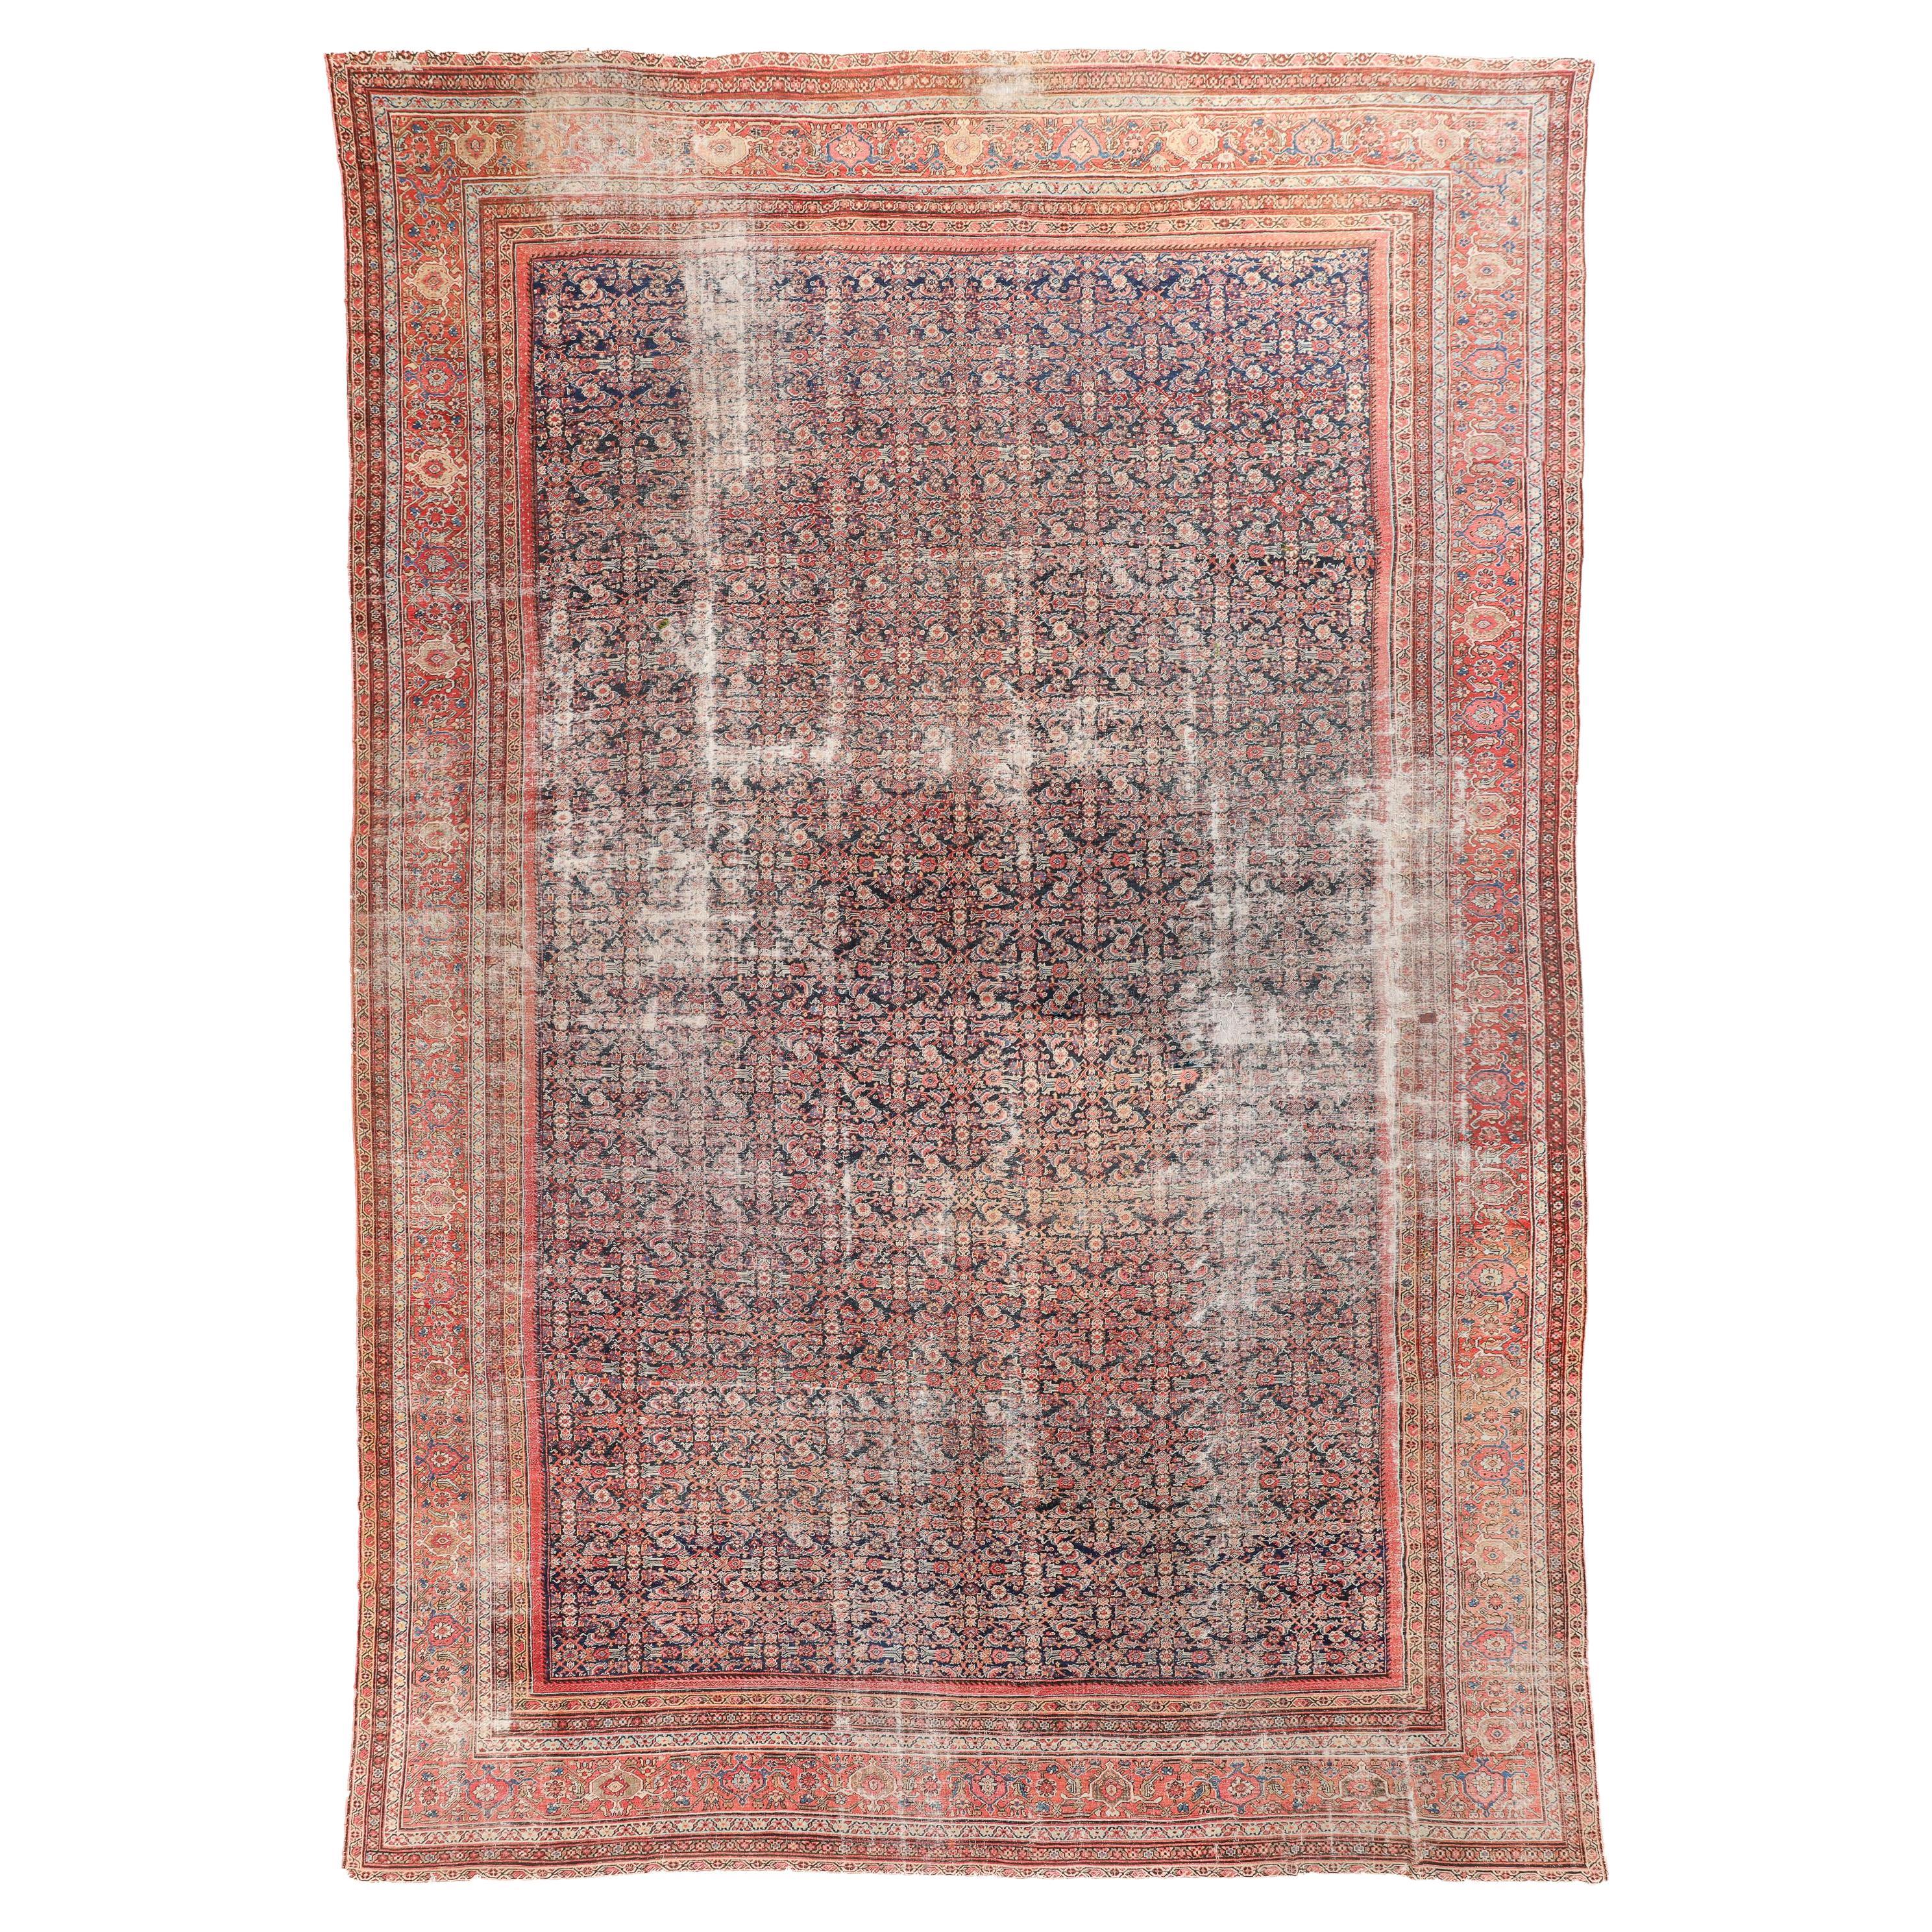 Palace Size Gorgeous Antique Sultanabad Rug 16x24 CIrca 1900s For Sale